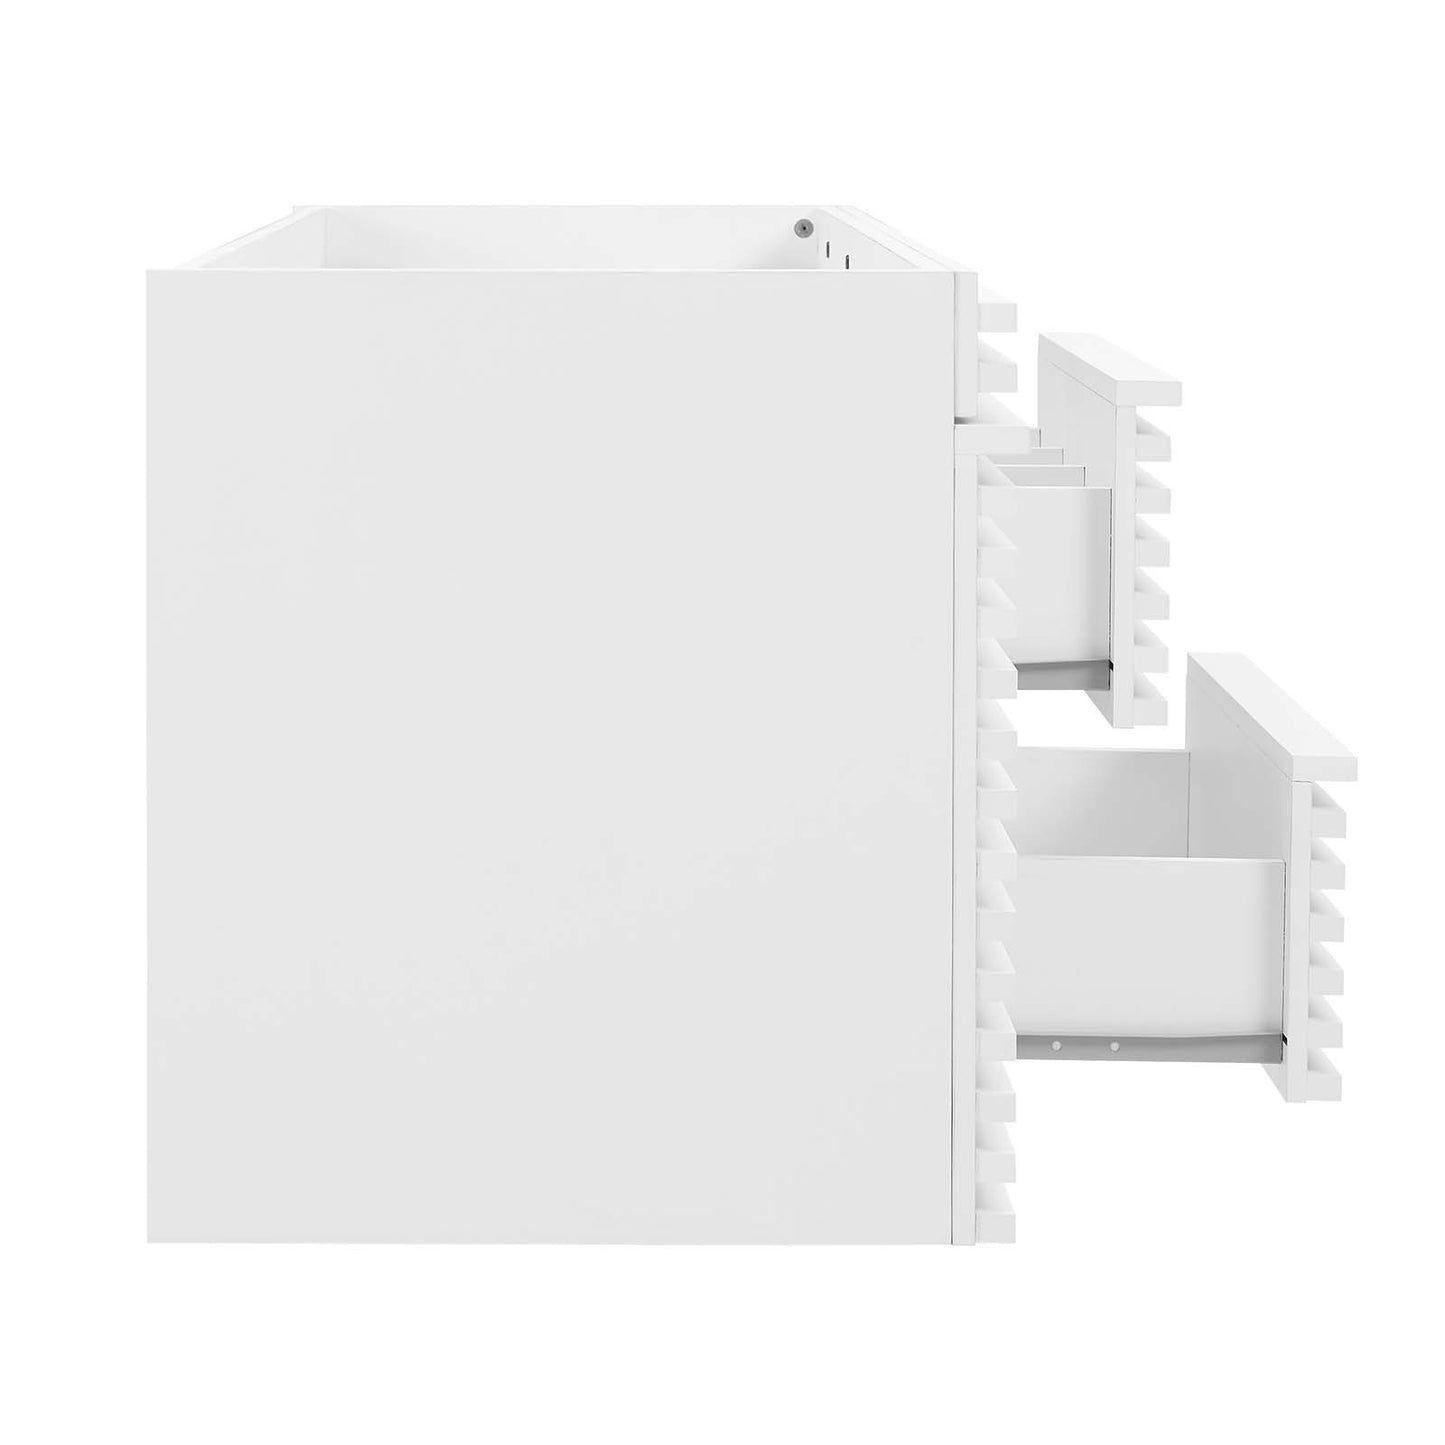 Render 48" Single Sink Compatible (Not Included) Bathroom Vanity Cabinet White EEI-5866-WHI